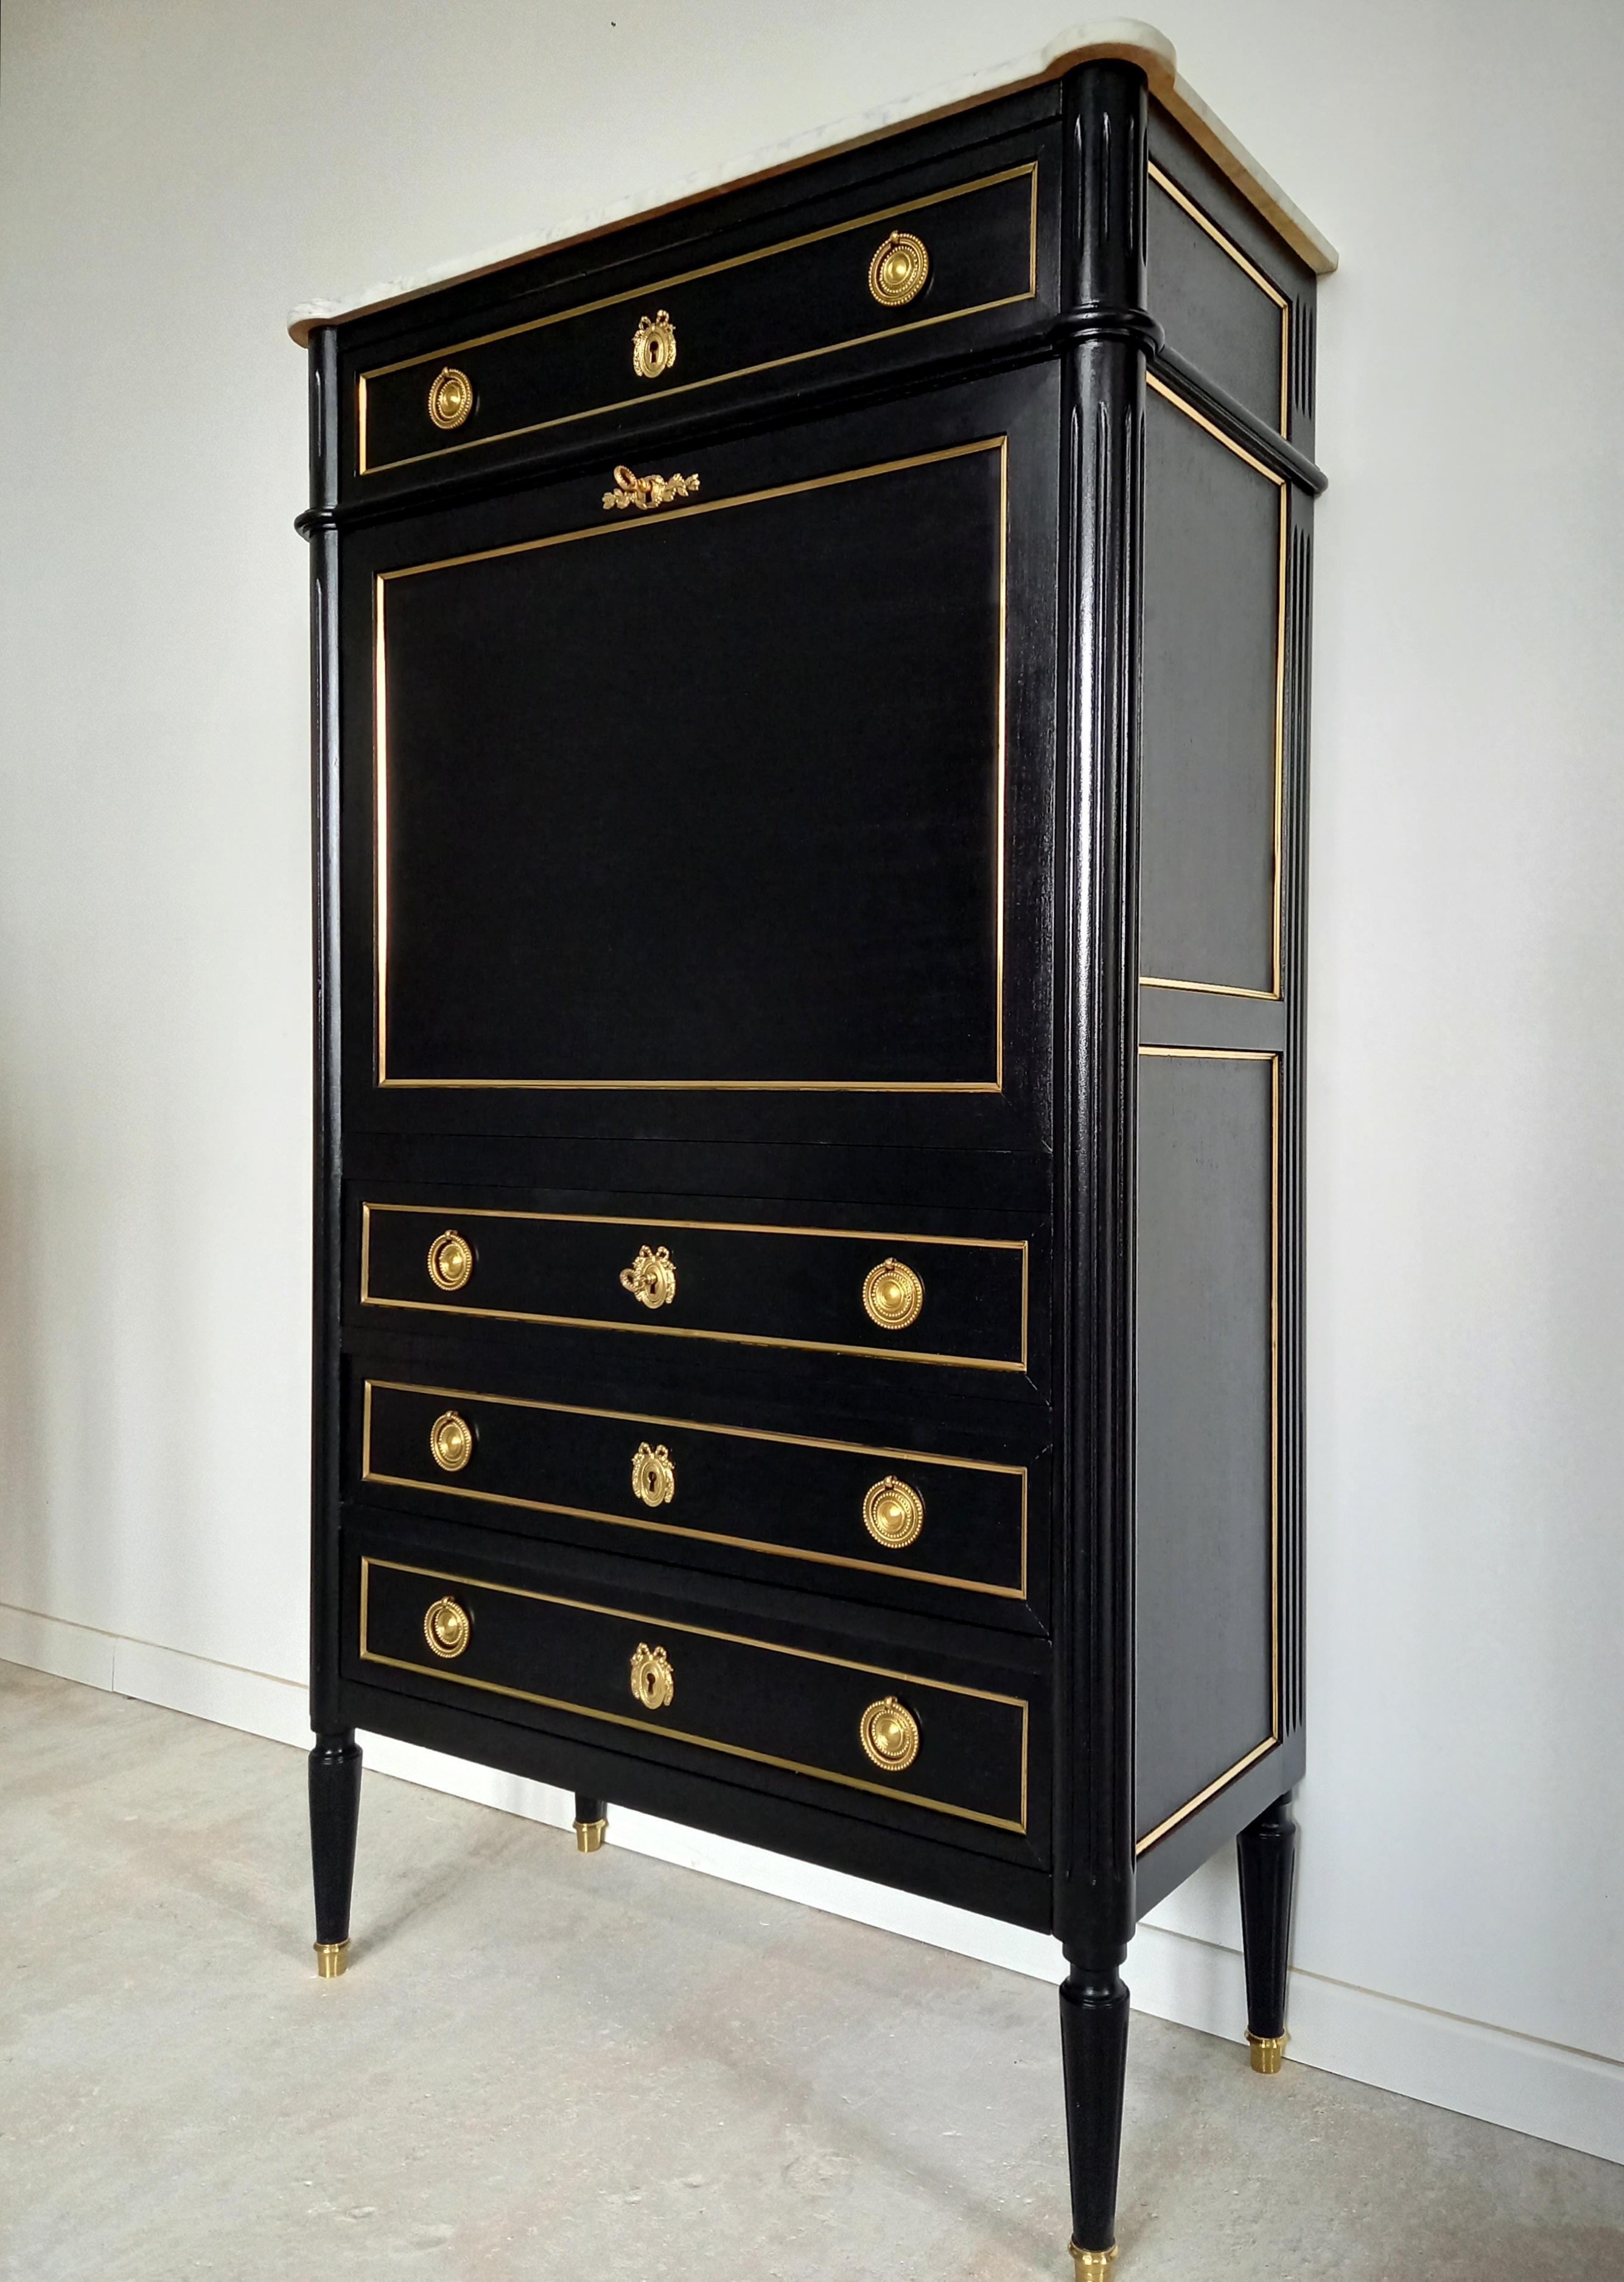 Antique French Louis XVI mahogany secretary chest of drawers topped with a white Carrara marble, fluted legs finished with golden bronze clogs and thorough dressed in bronze and brass details.
Marble and wooden structures are in excellent